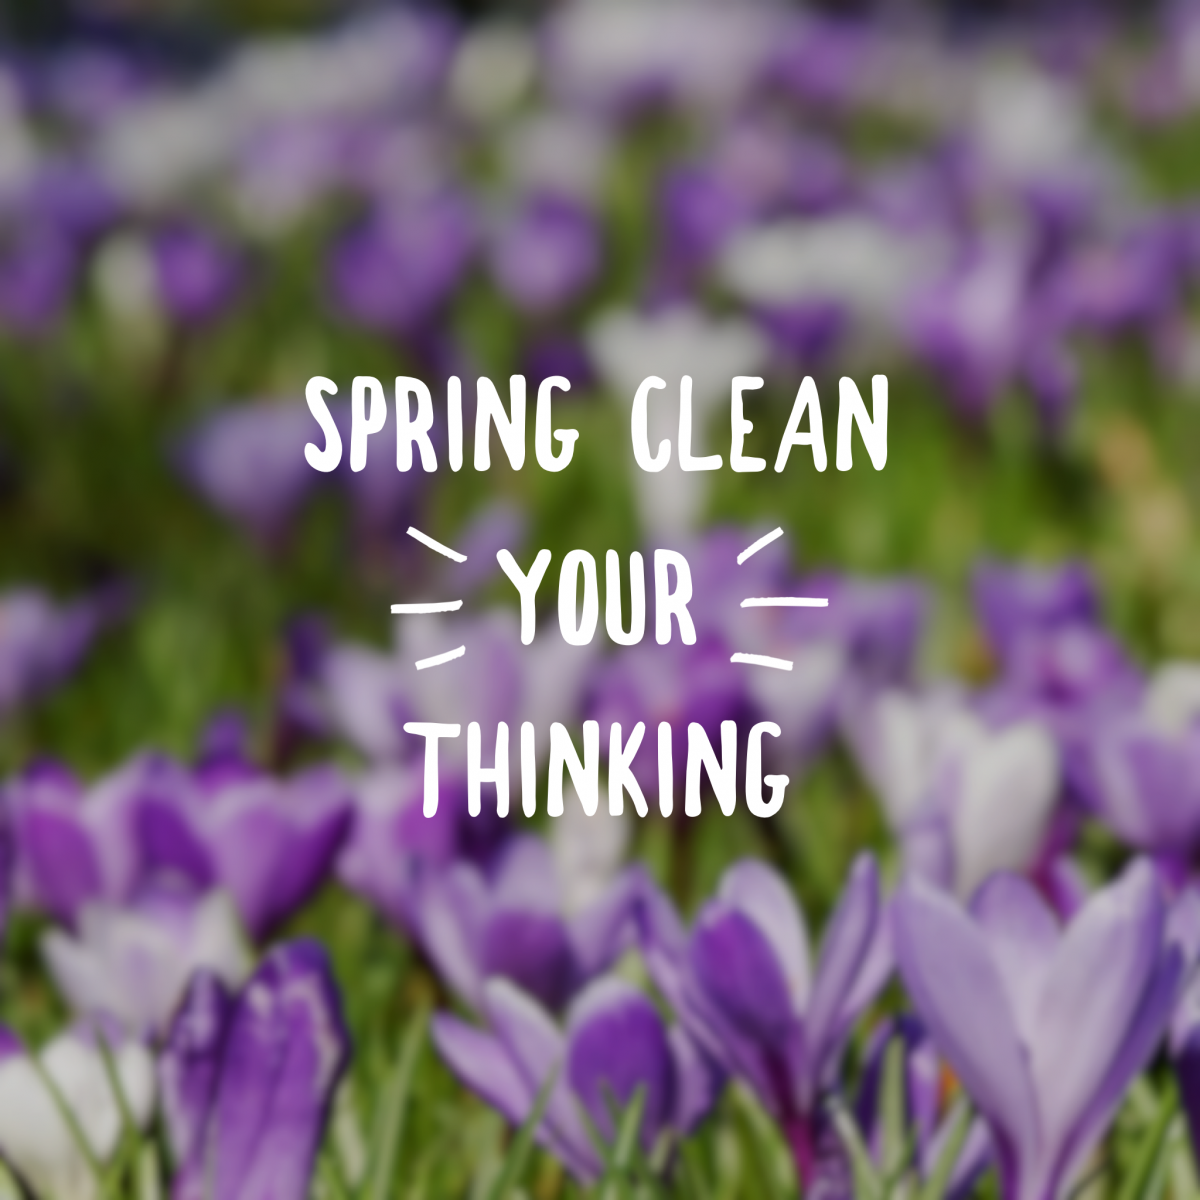 Spring clean your thinking